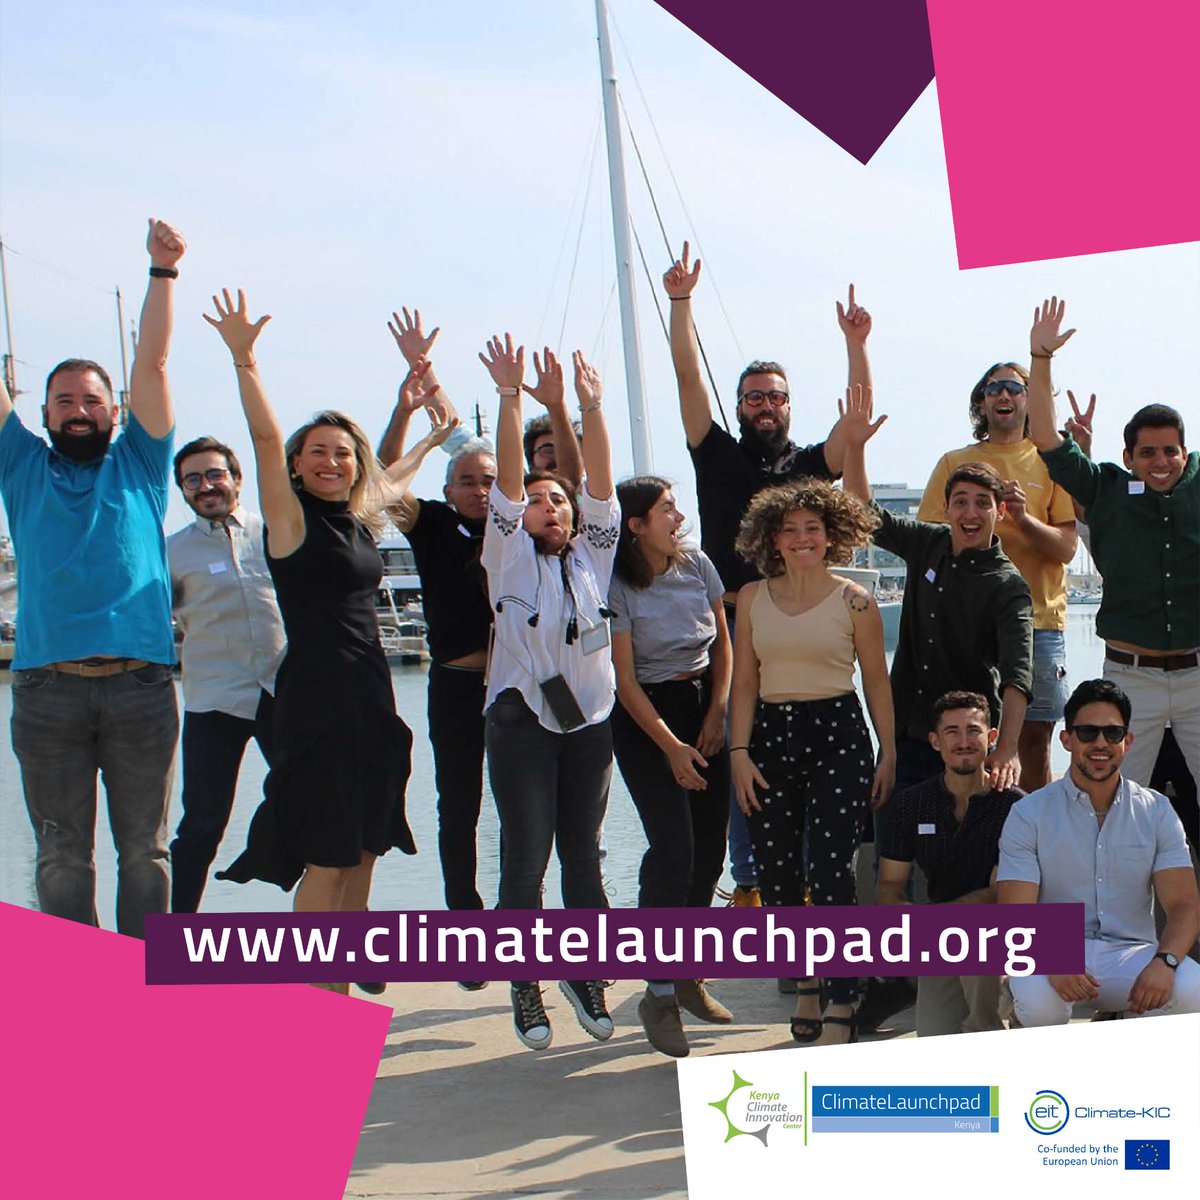 🌱 Excited to make a green impact? Join the #ClimateLaunchpad competition and turn your #cleantech #business idea into a reality. We're accepting applications in various areas: i) Sustainable Mobility ii) Circular Economies iii) Urban Solutions iv) Clean Energy v) Food…